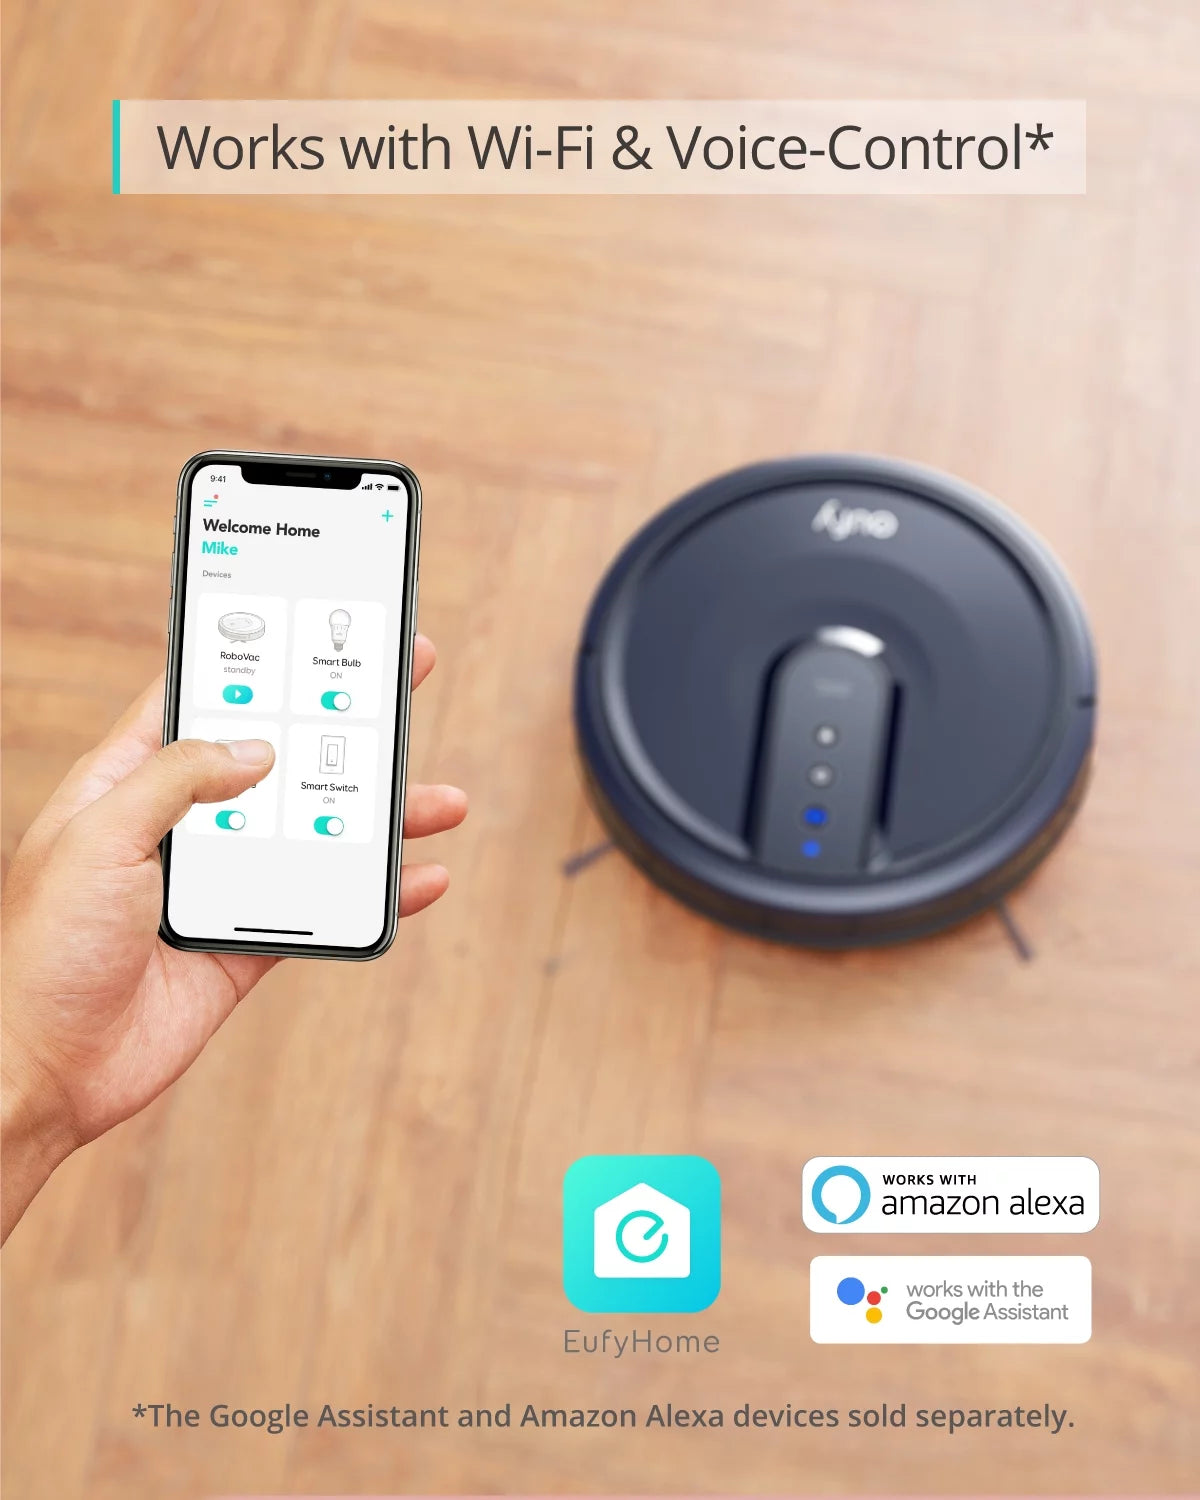 25C Wi-Fi Connected Robot Vacuum, Great for Picking up Pet Hairs, Quiet, Slim